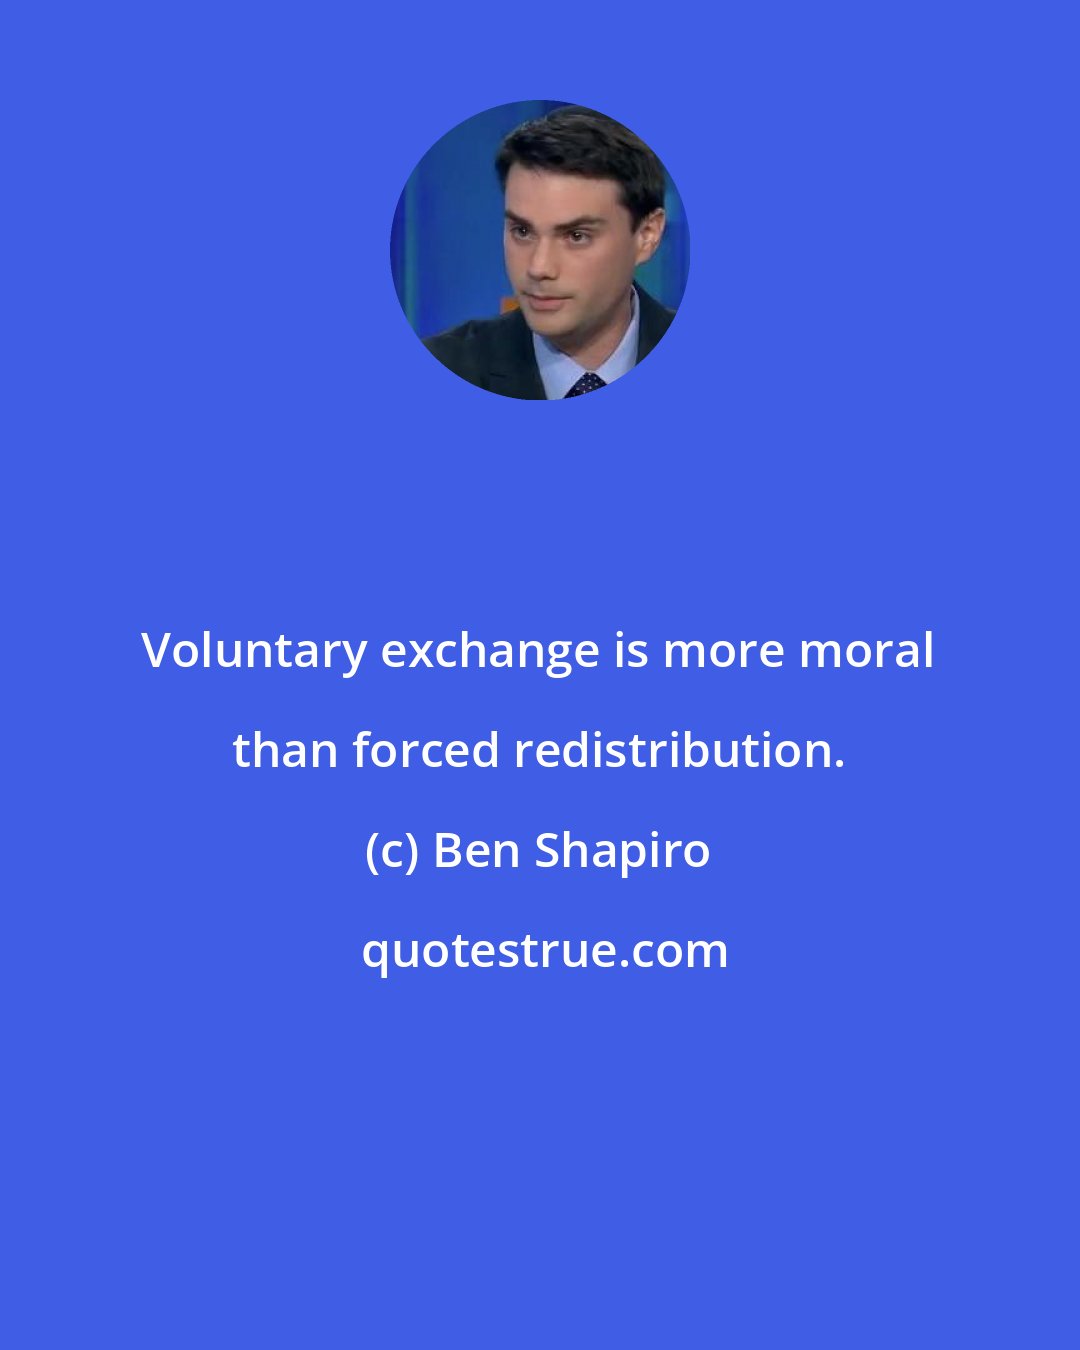 Ben Shapiro: Voluntary exchange is more moral than forced redistribution.